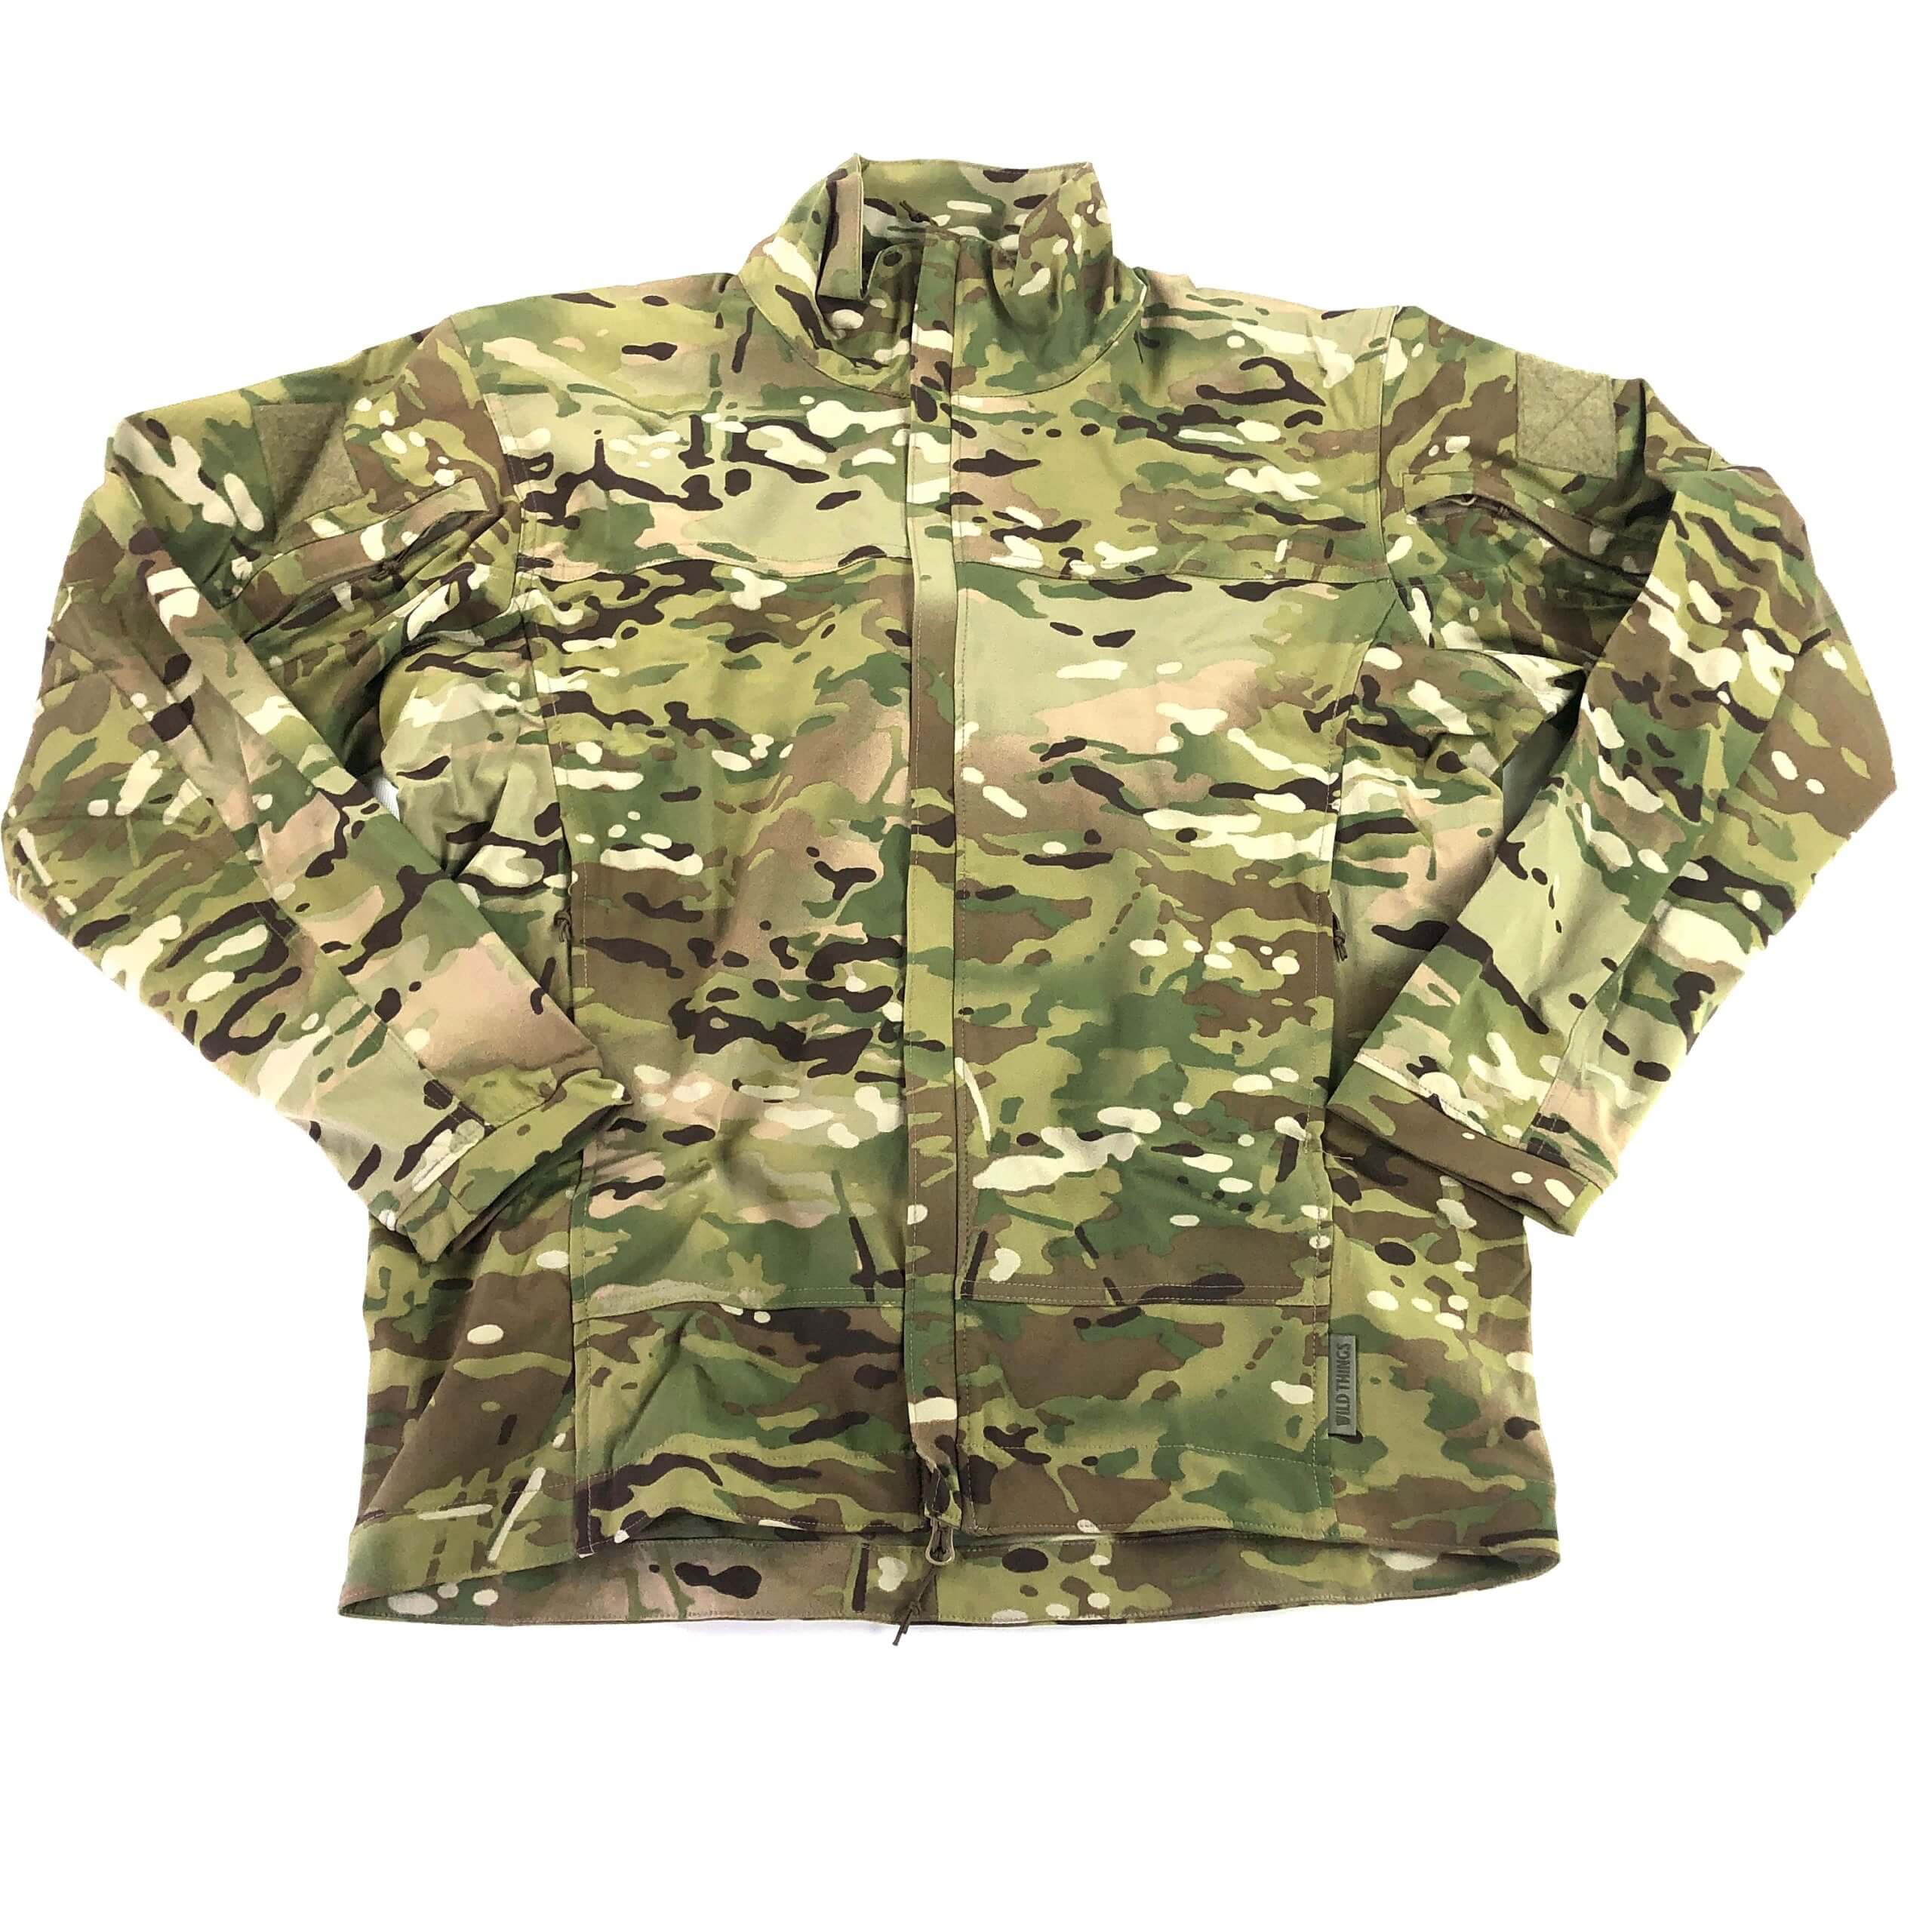 Wild Things Soft Shell Jacket, 4 Way Stretch Multicam - Venture